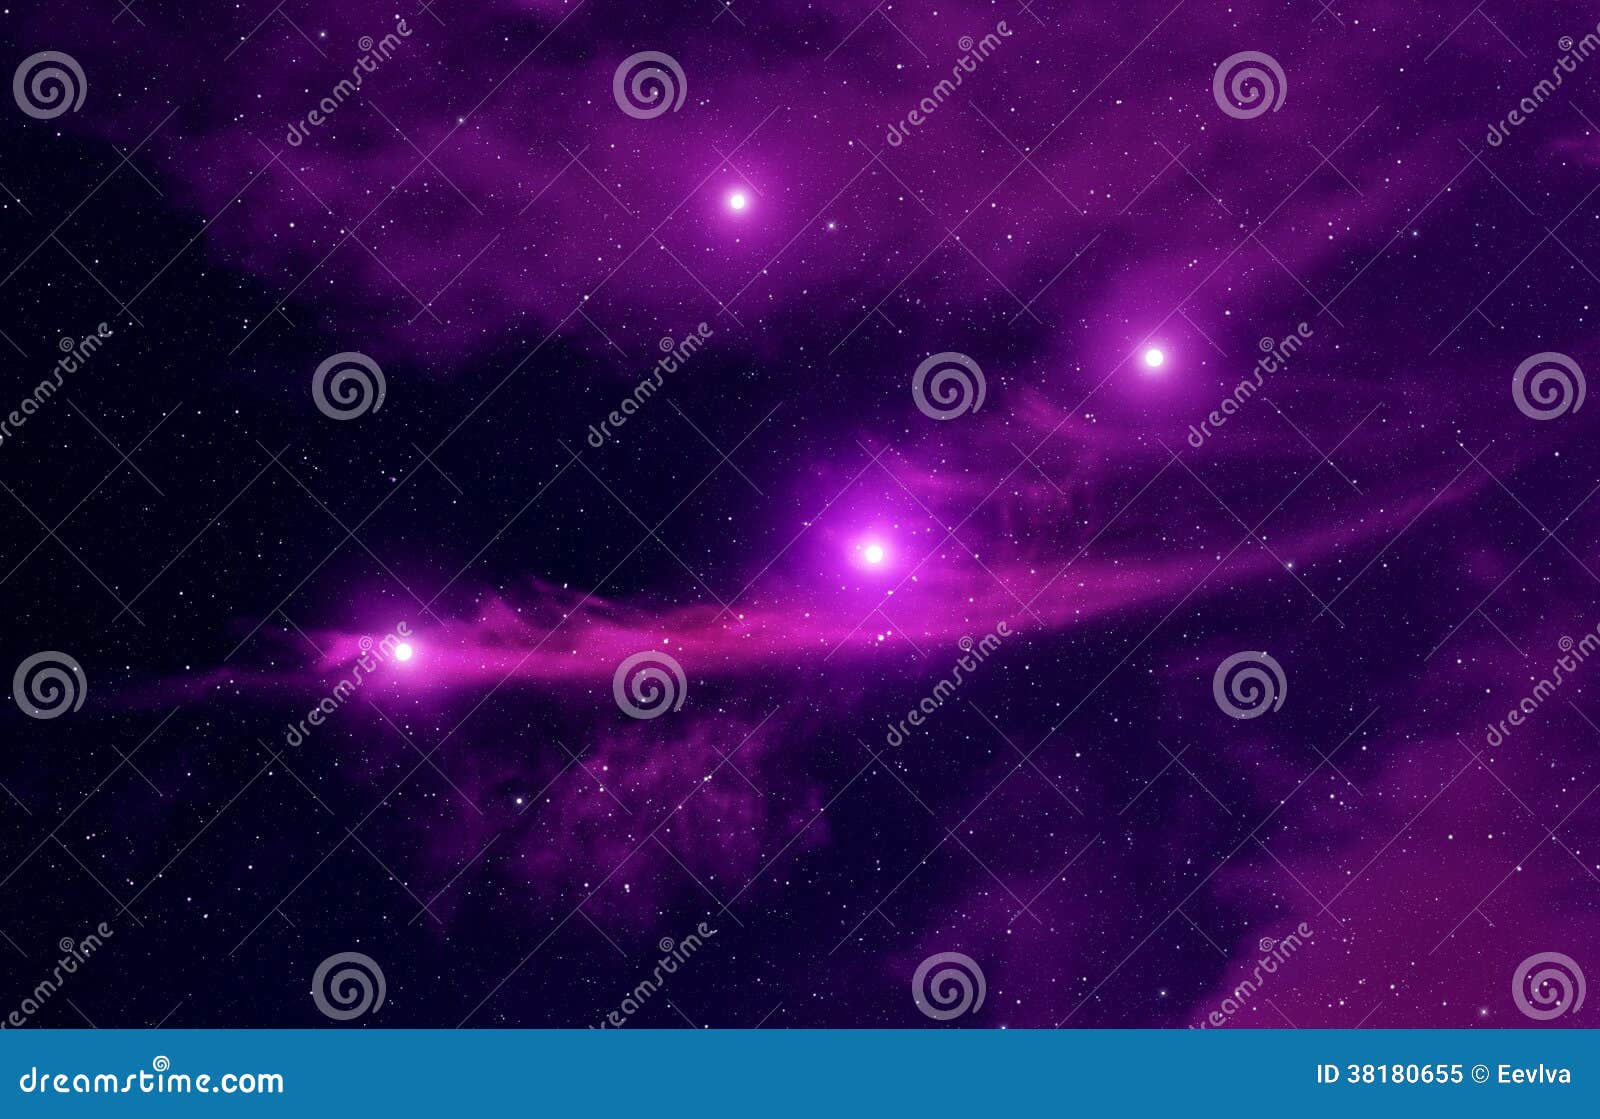 Space background with nebula and bright stars.